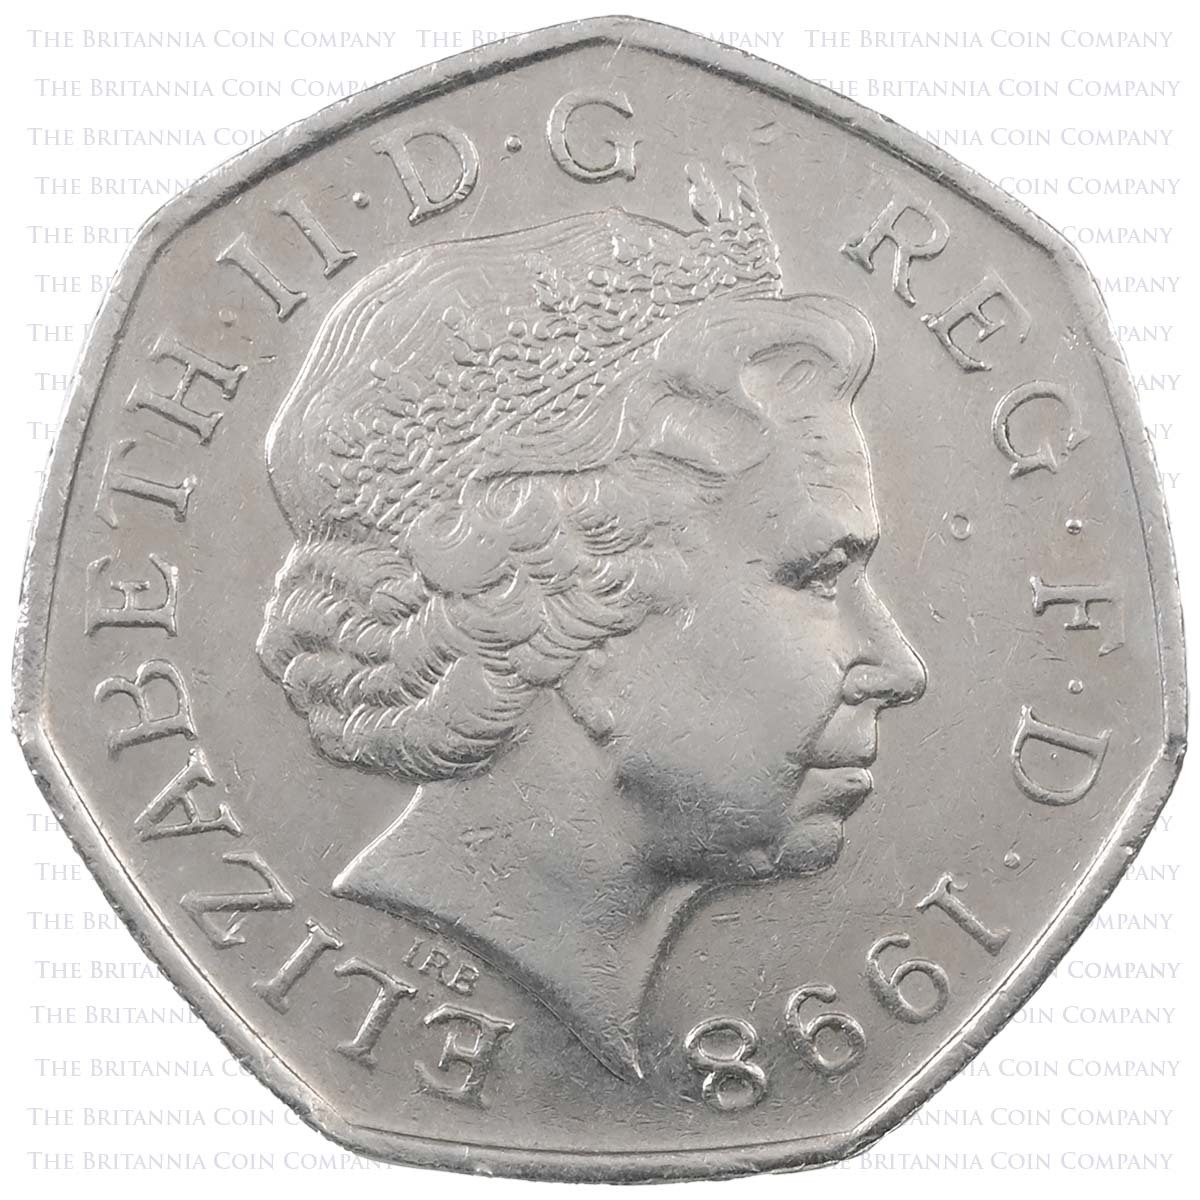 1998 National Health Service Circulated Fifty Pence Coin Obverse